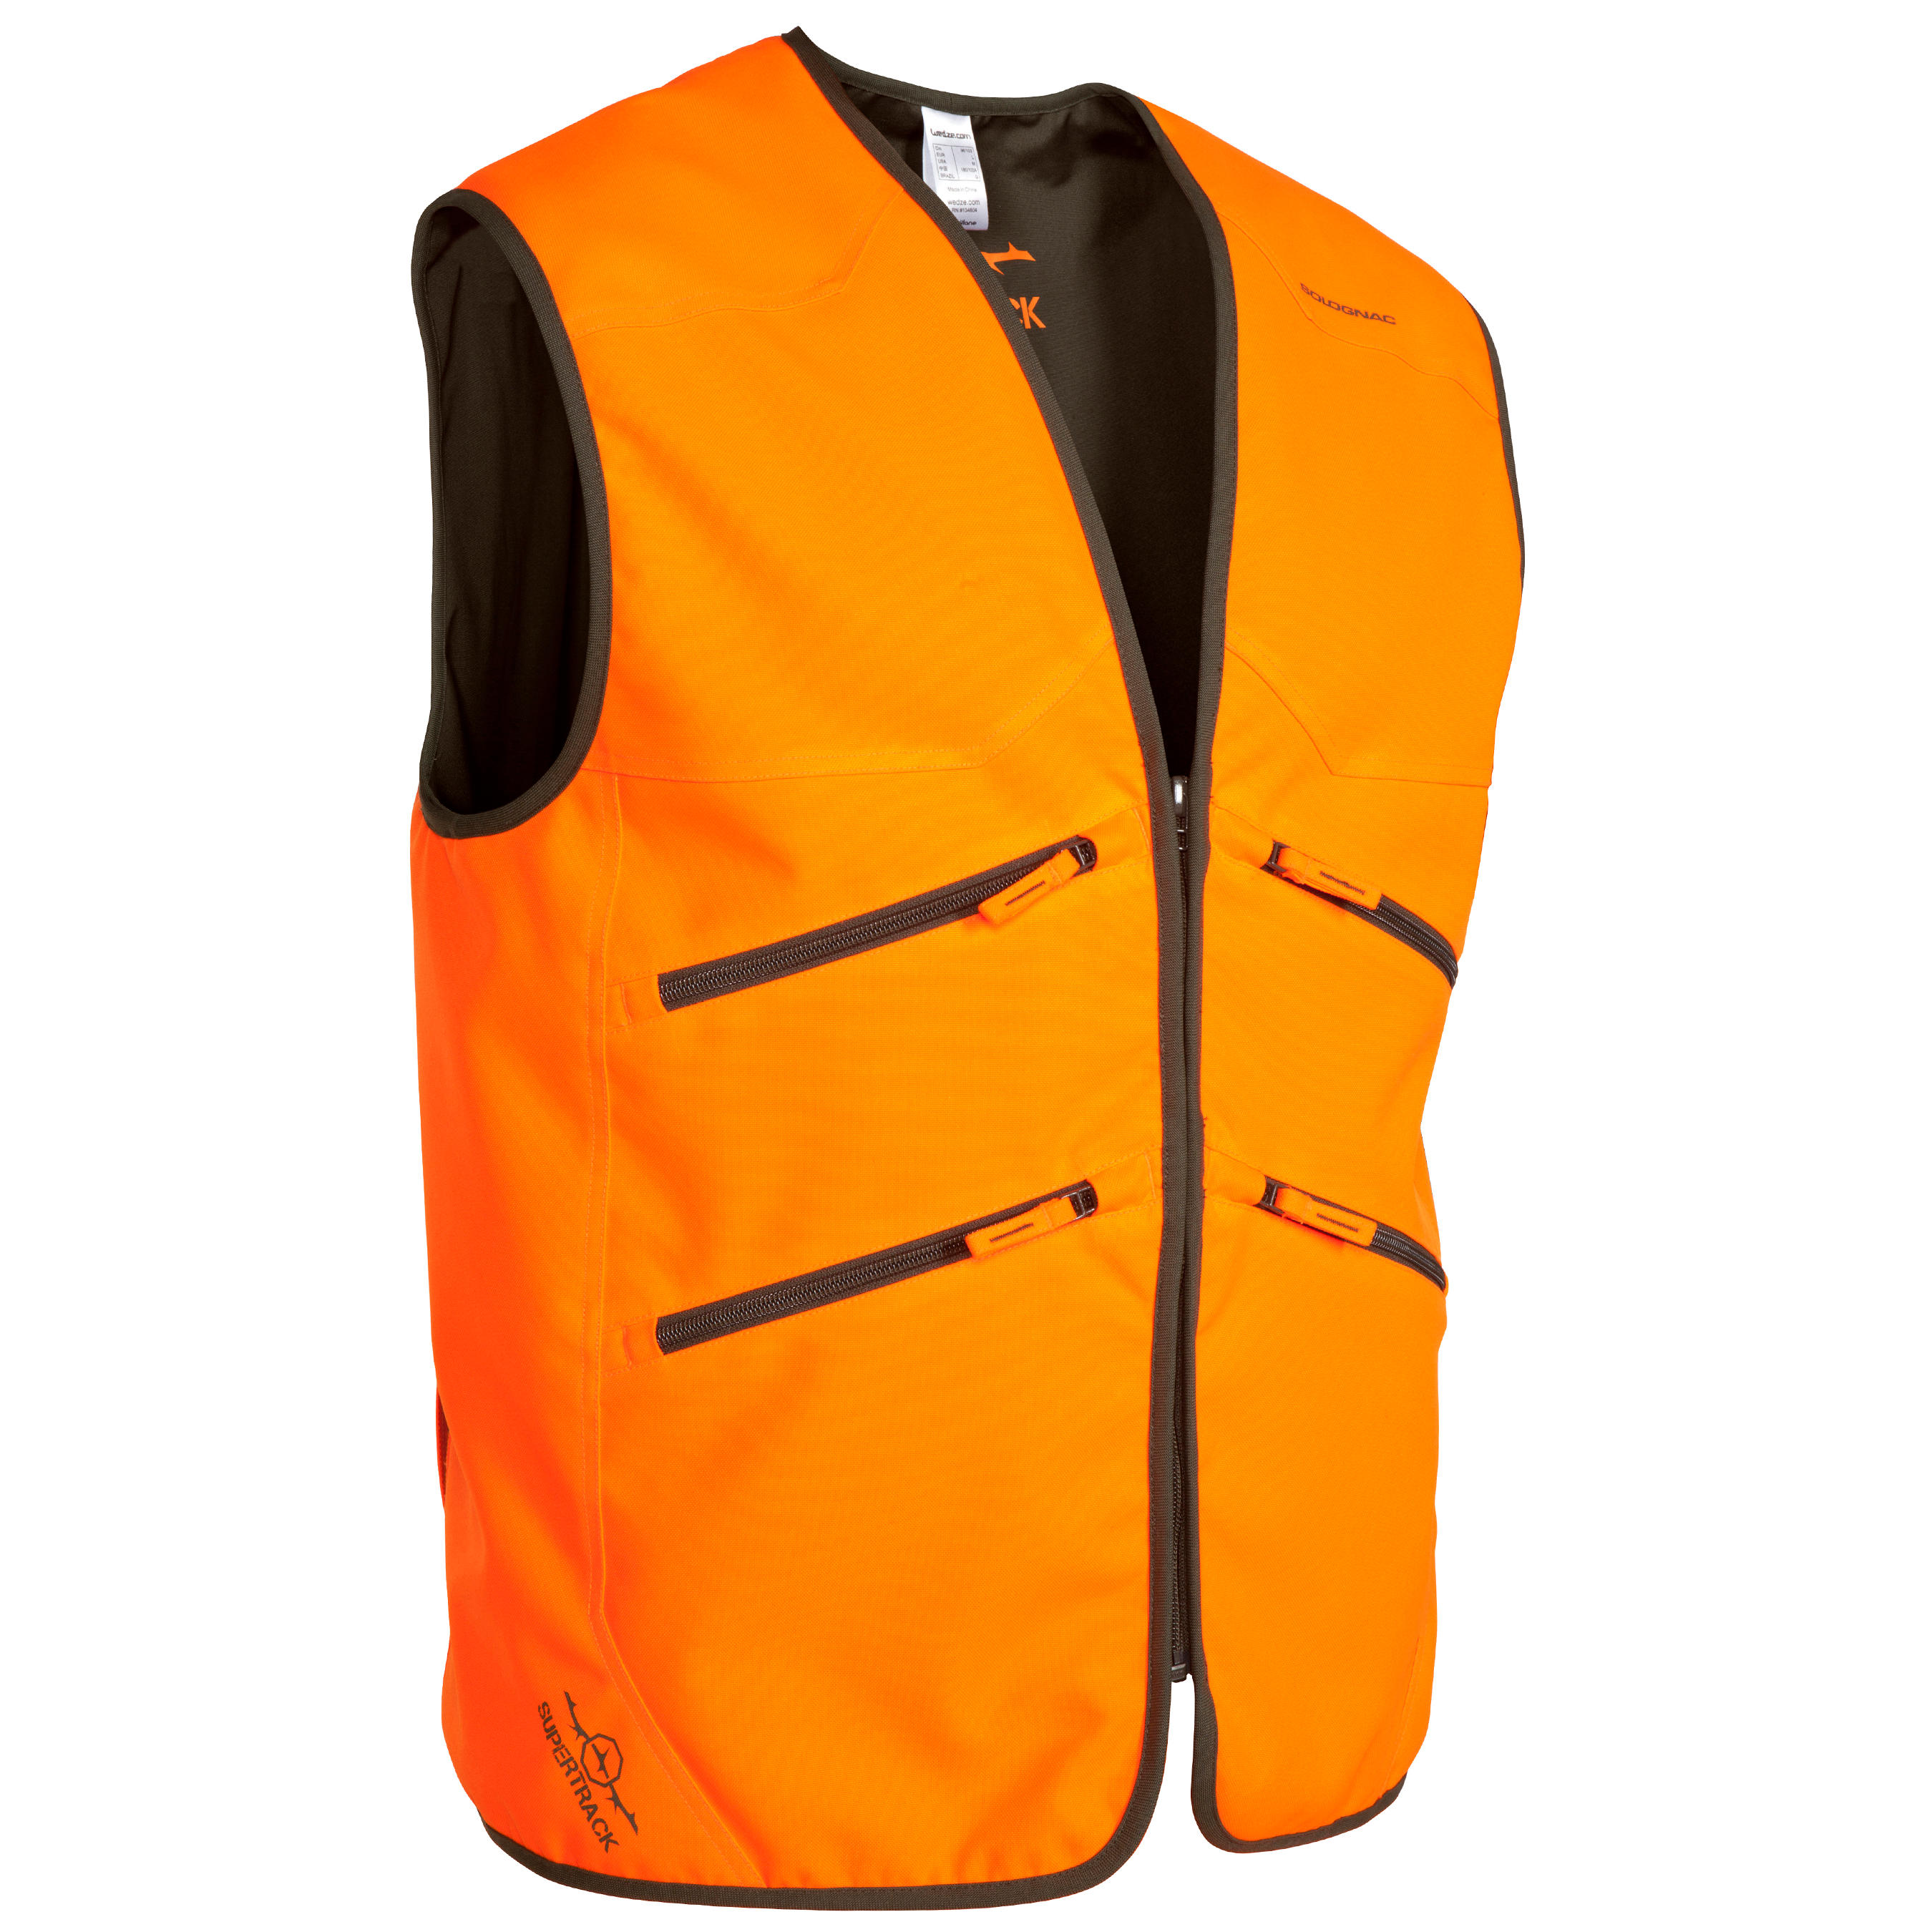 Gilet Fluo Course A Pied Decathlon Top Sellers - brsnc.in 1691760177